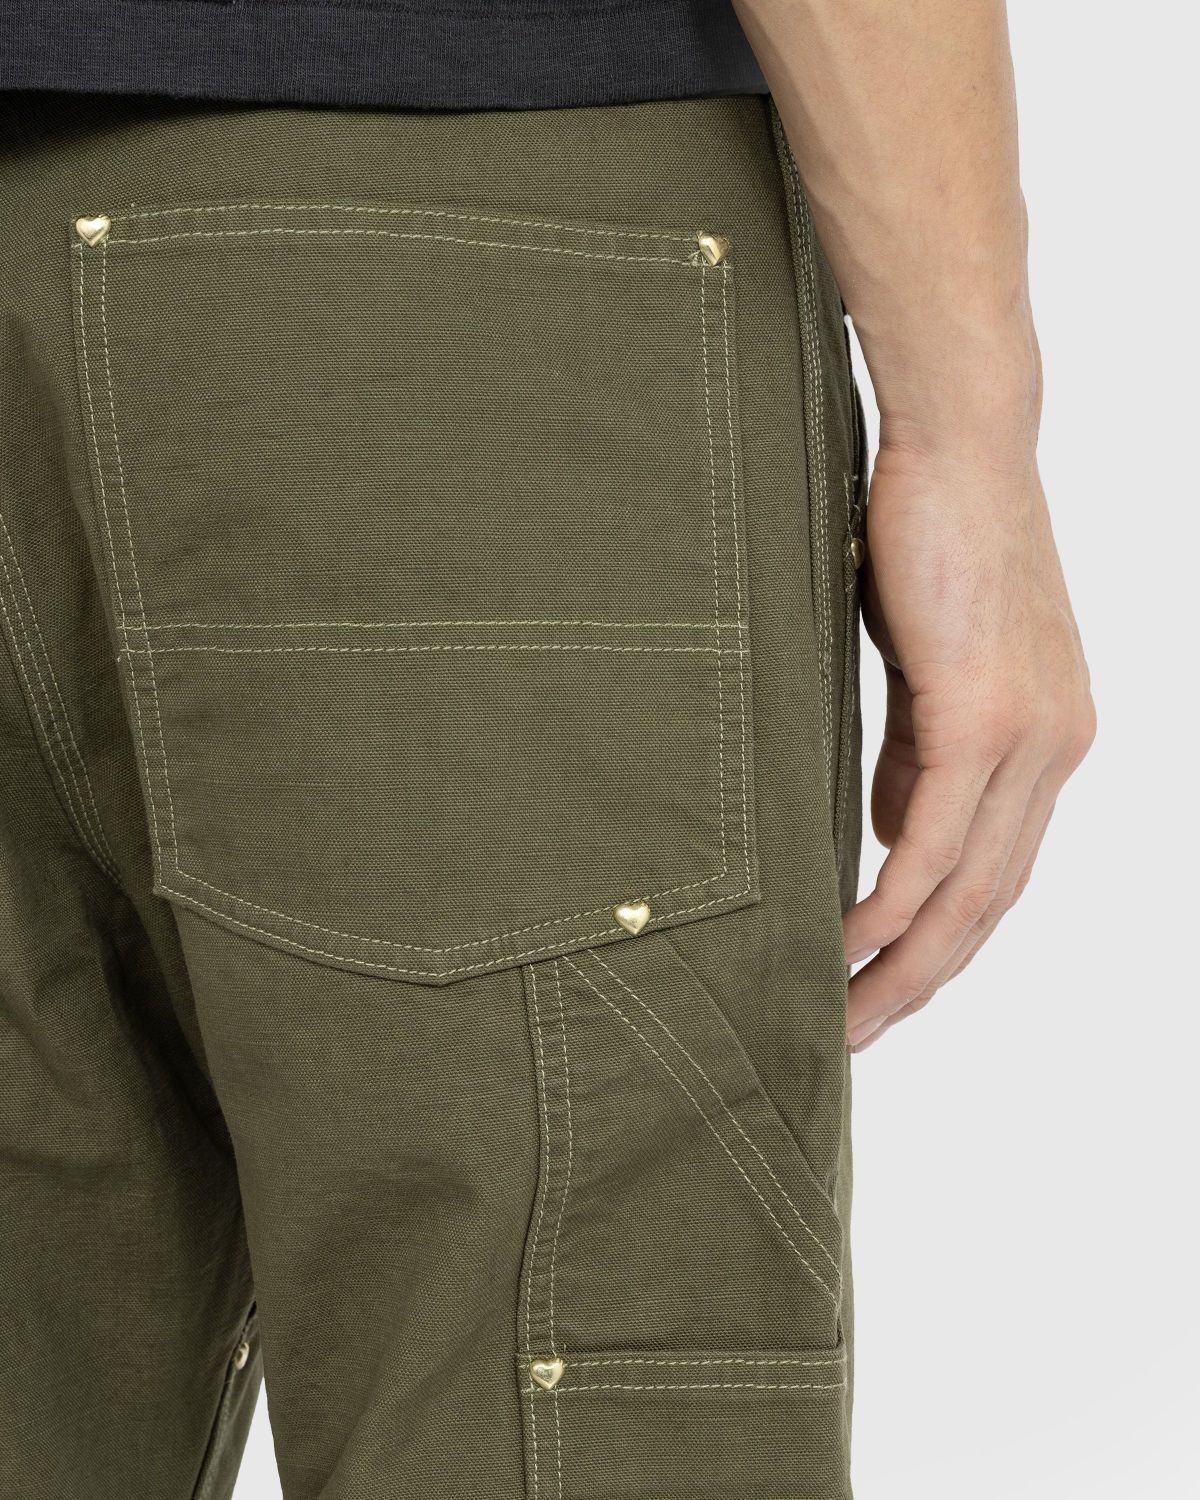 Human Made – Duck Painter Pants Olive Drab | Highsnobiety Shop